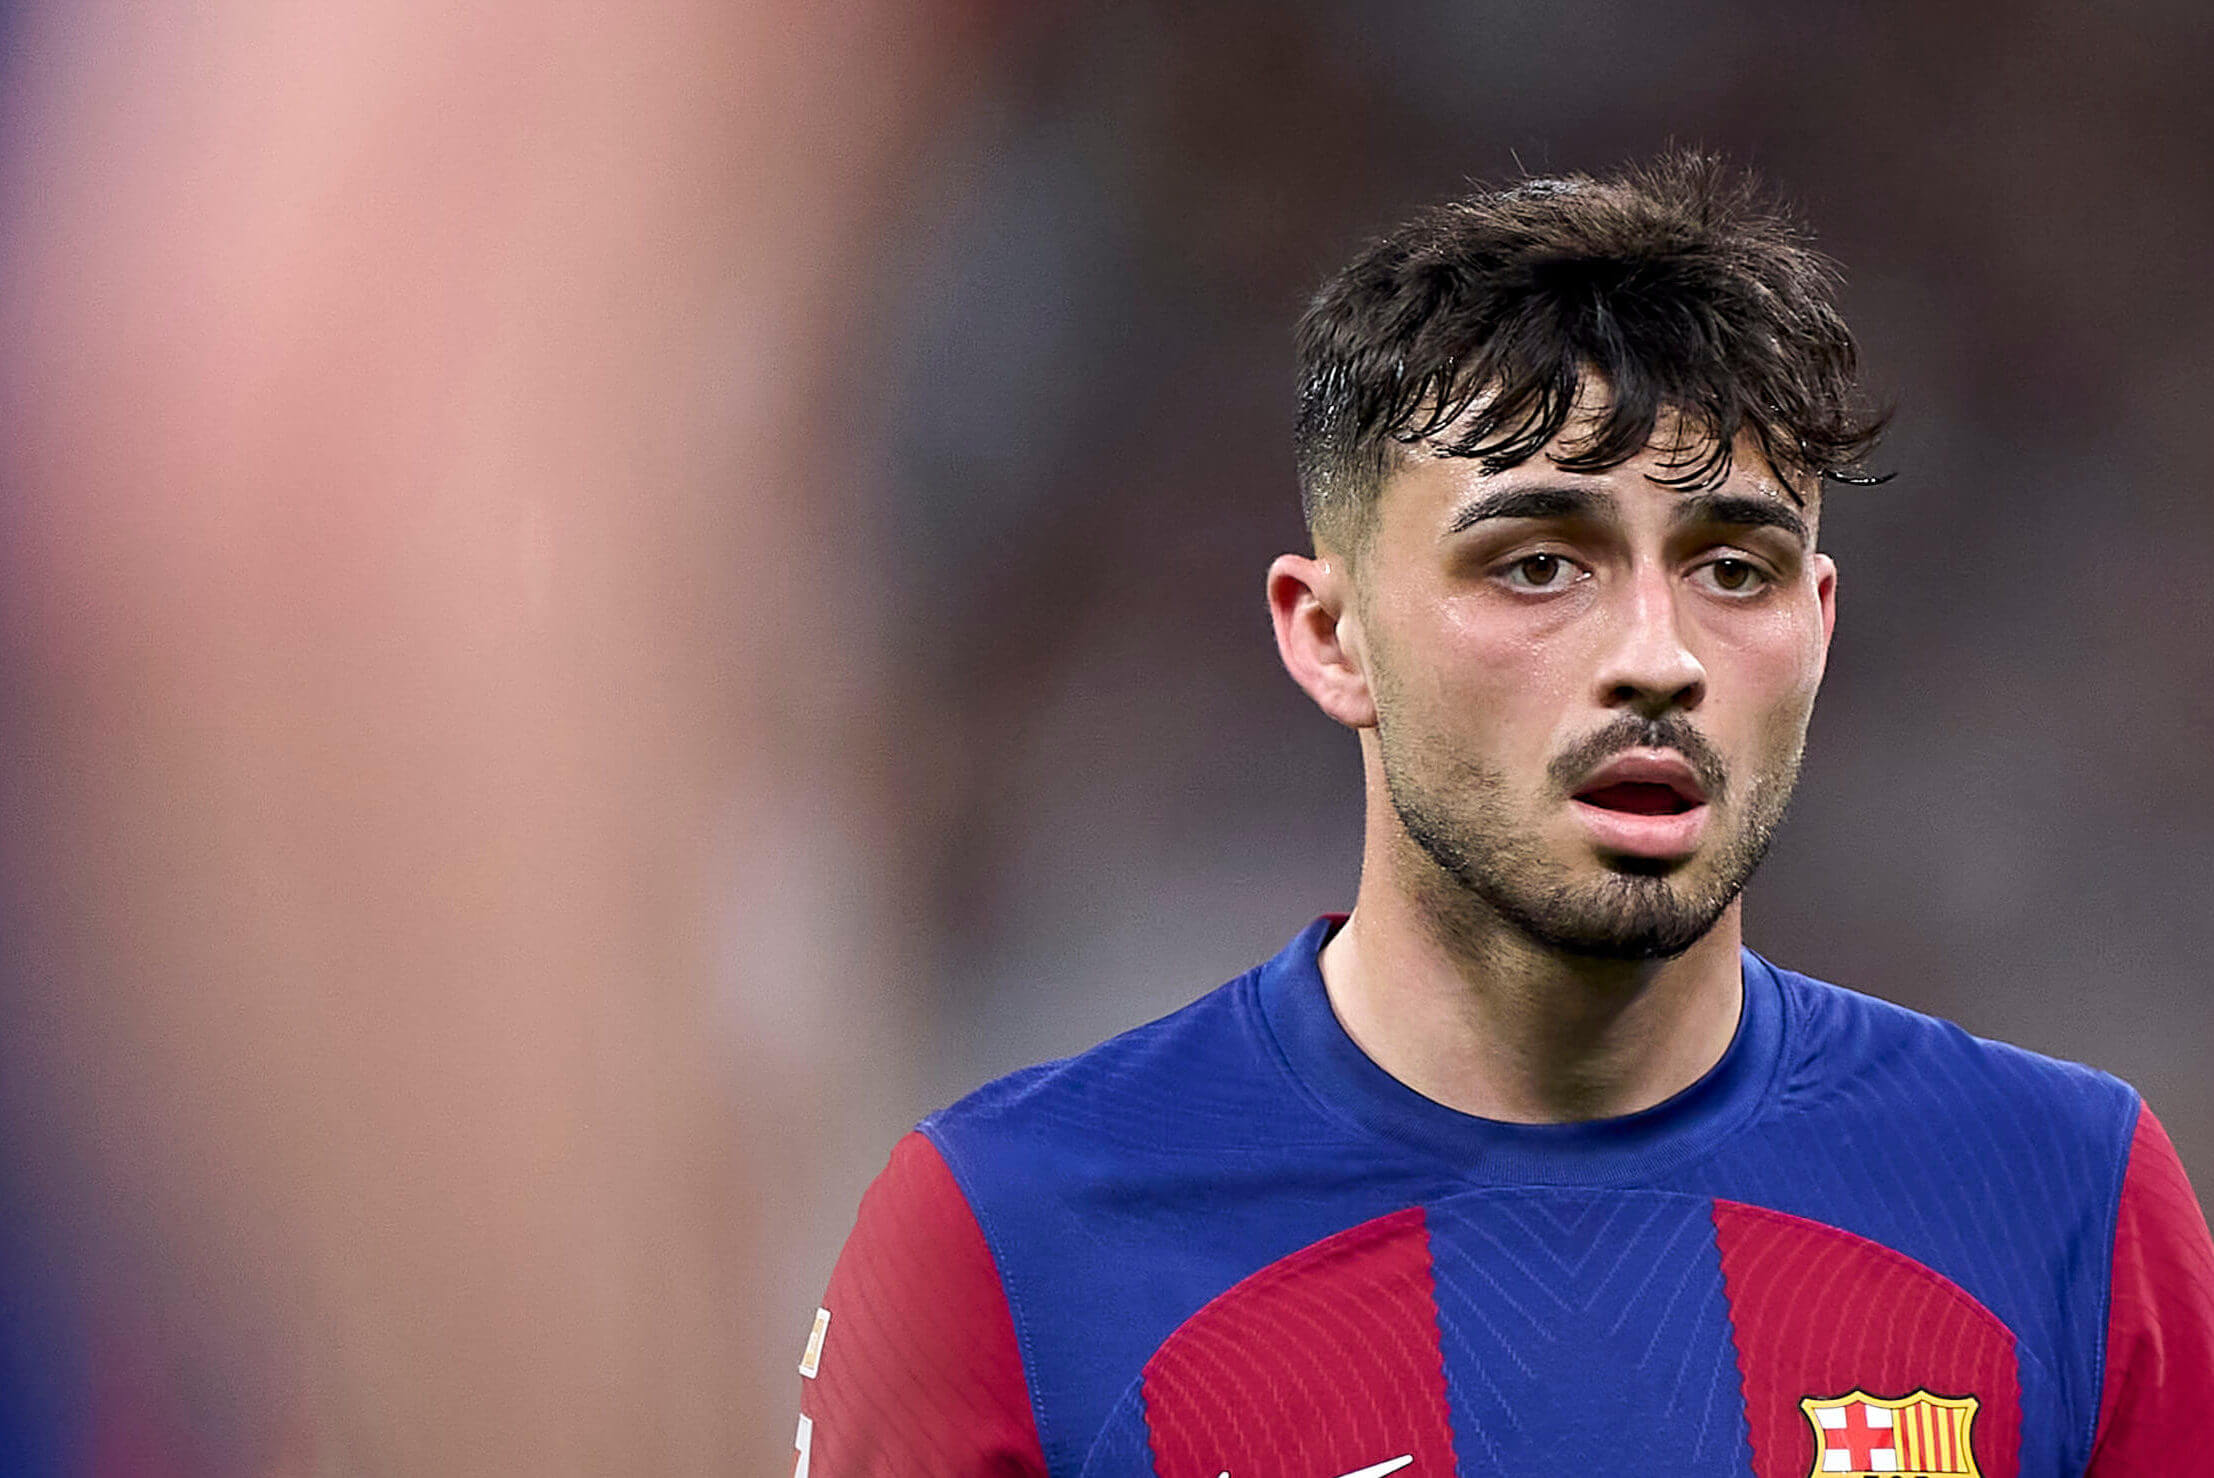 Pedri is being doubted at Barcelona like never before - he needs a reset